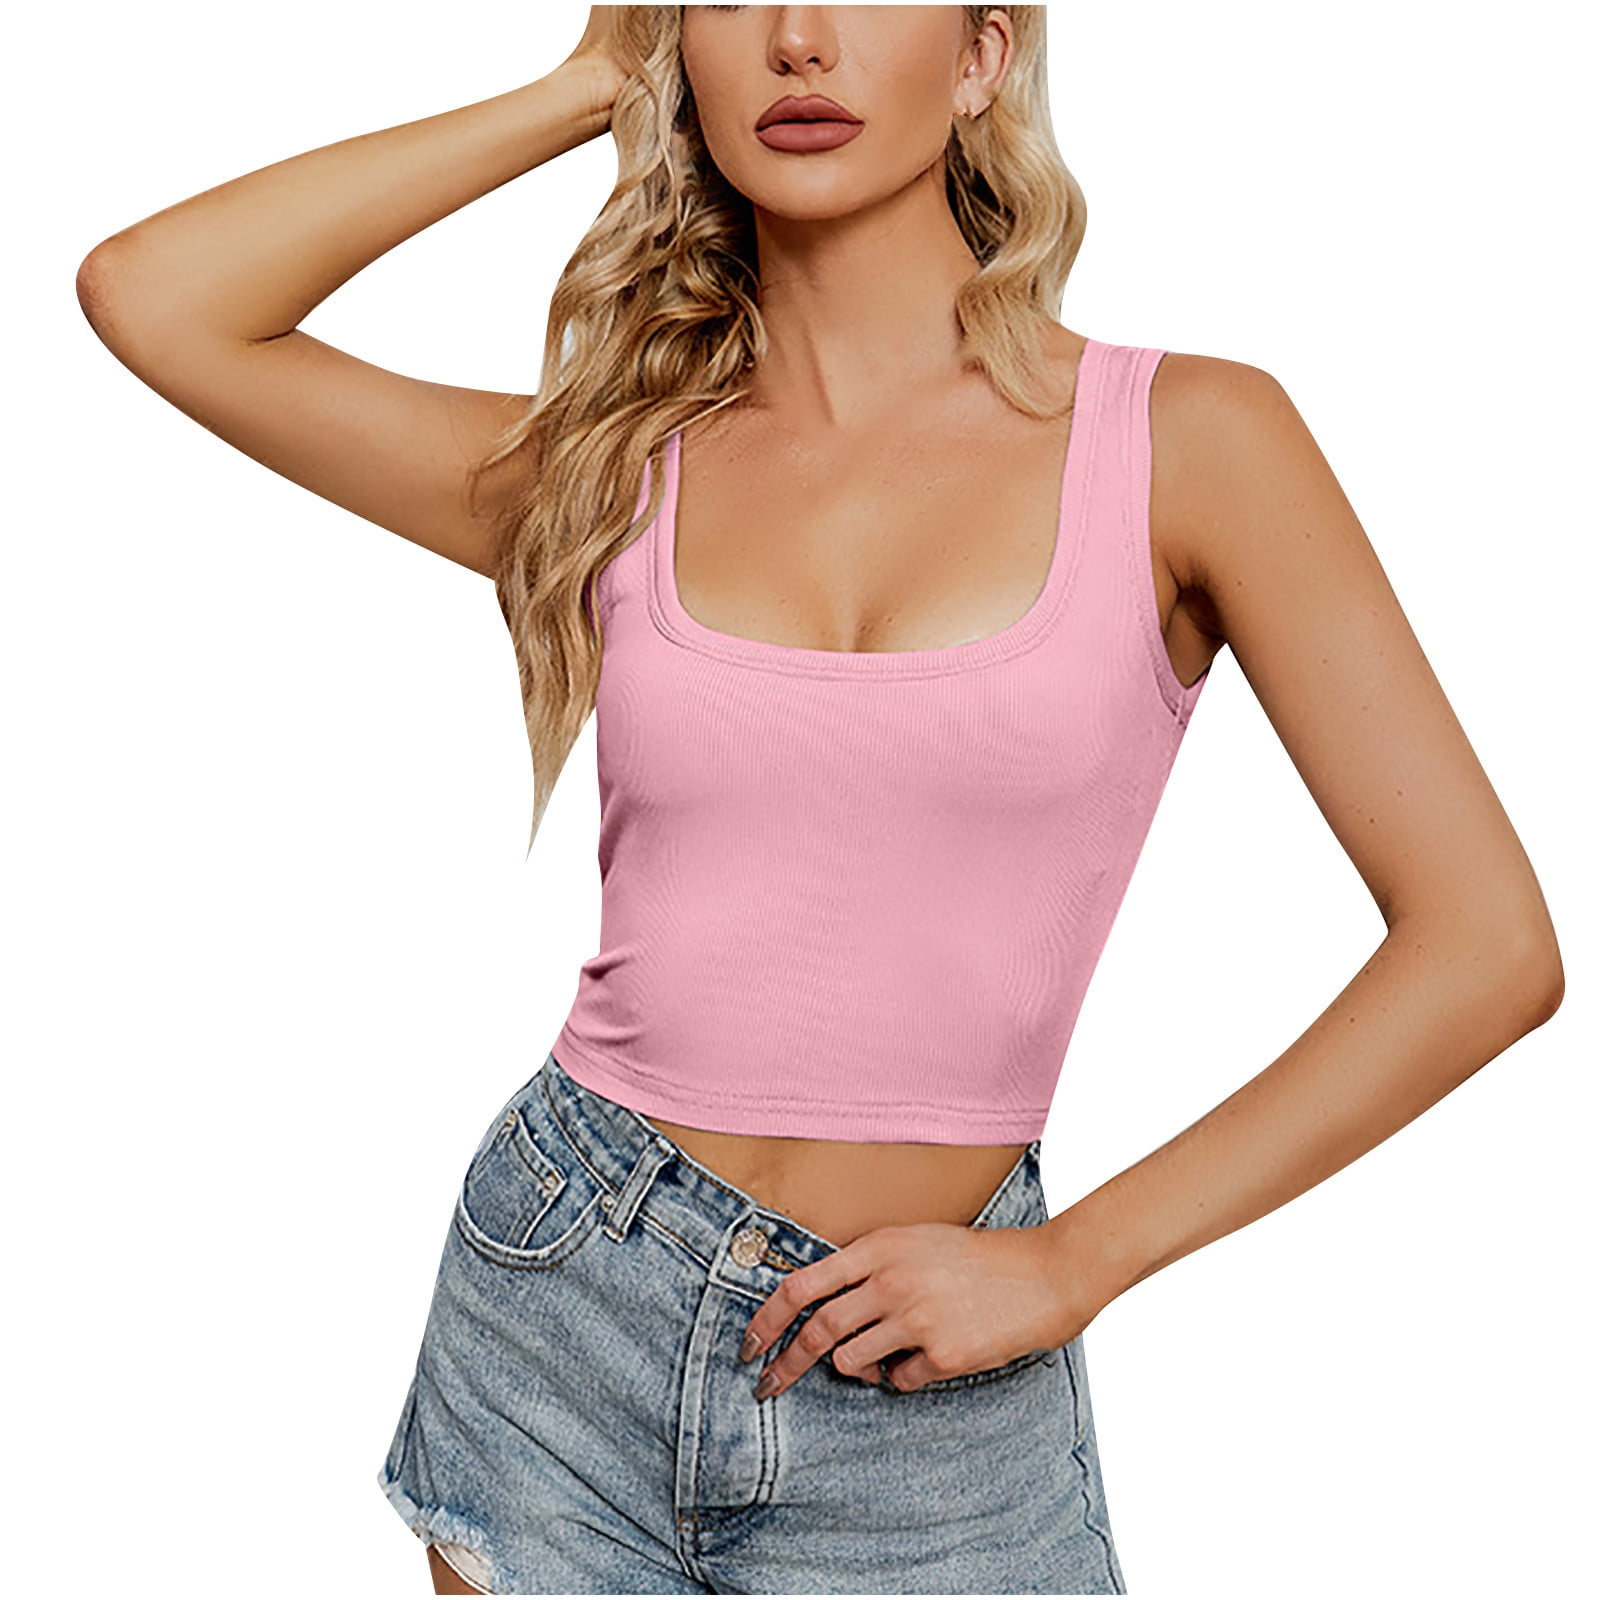  Women's Crop Tank Top Cotton Scoop Racerback Sleeveless Slim  Fit Tops Black S : Clothing, Shoes & Jewelry